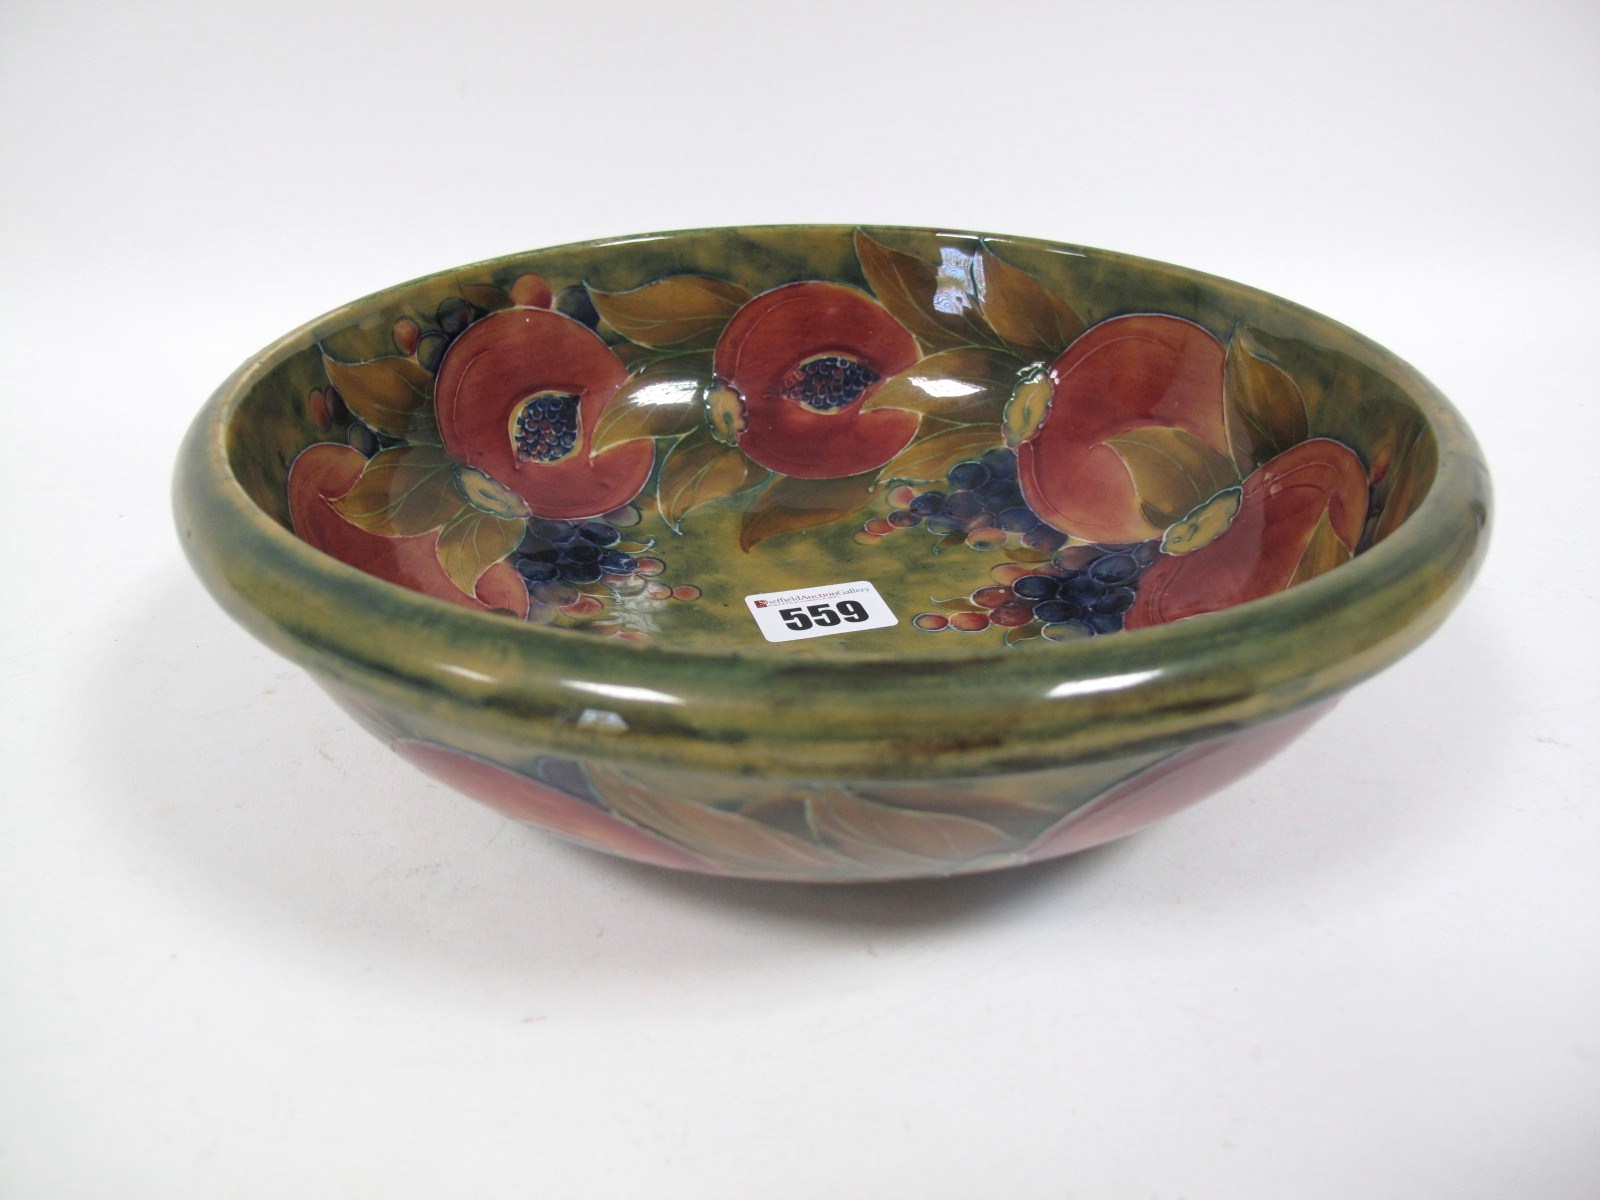 An Early XX Century Moorcroft Pottery Circular Bowl, tube-lined and painted with the Pomegranate